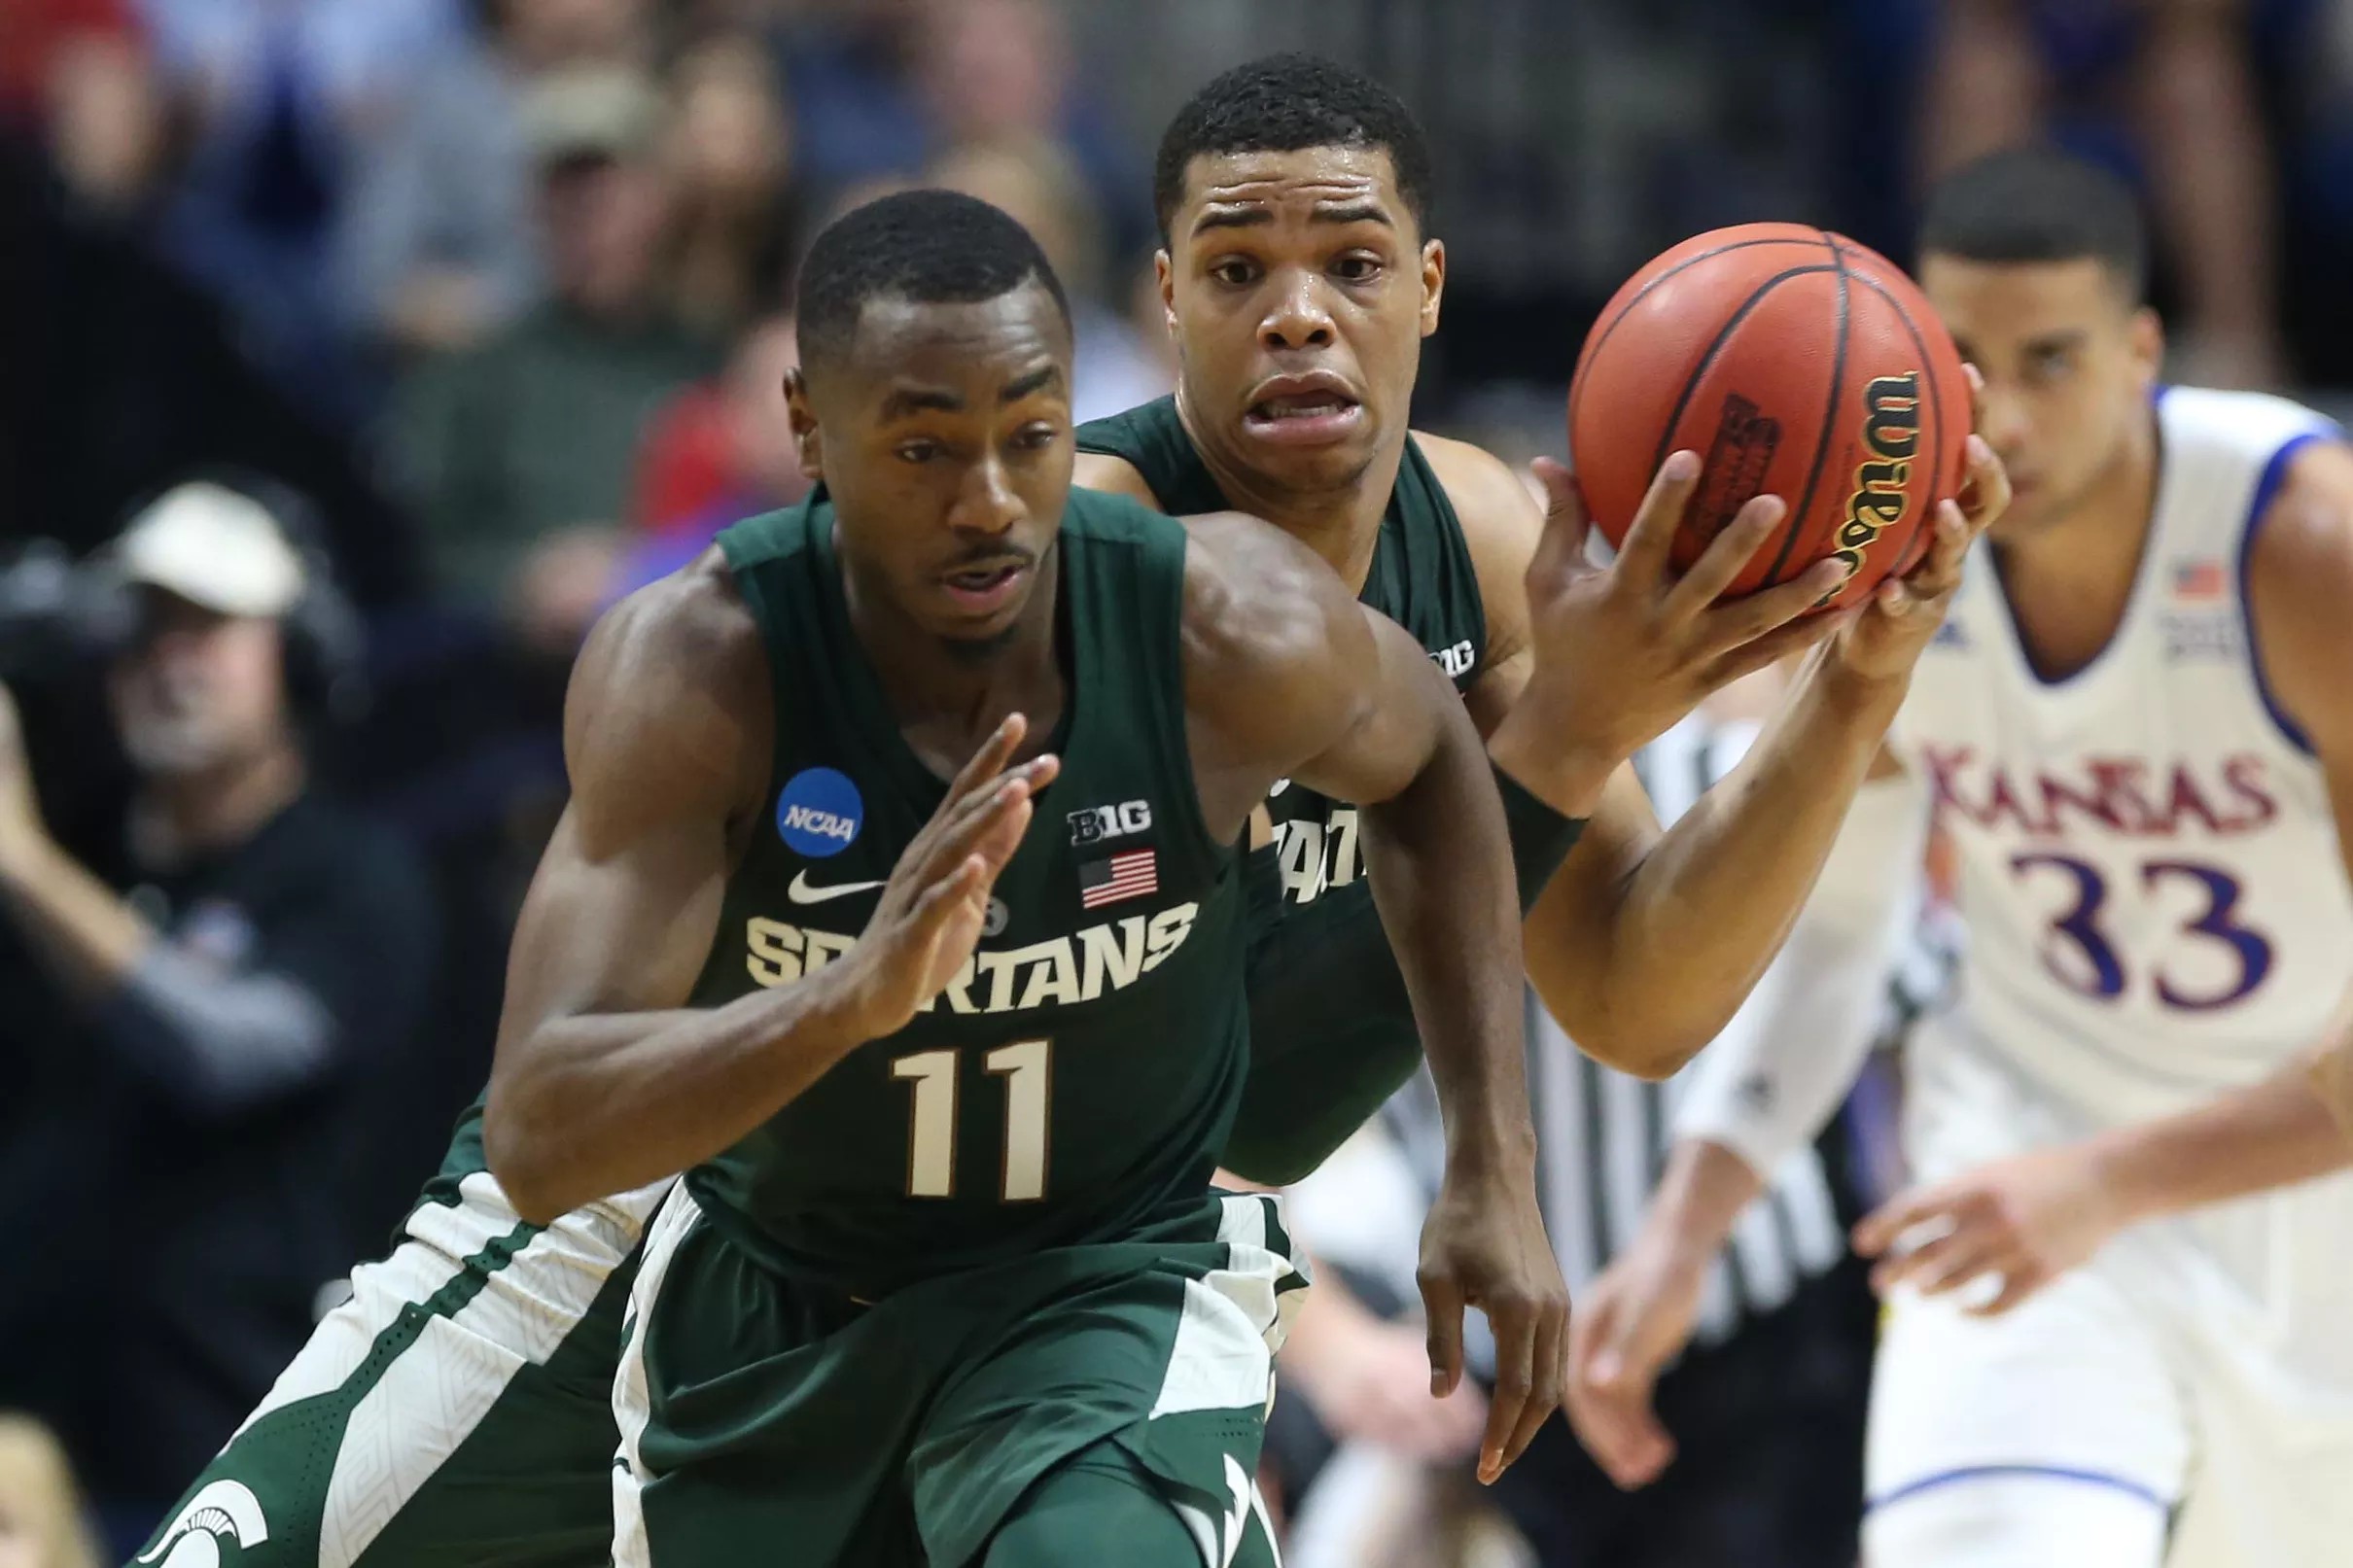 MSU basketball Are high expectations too high? Or just right?